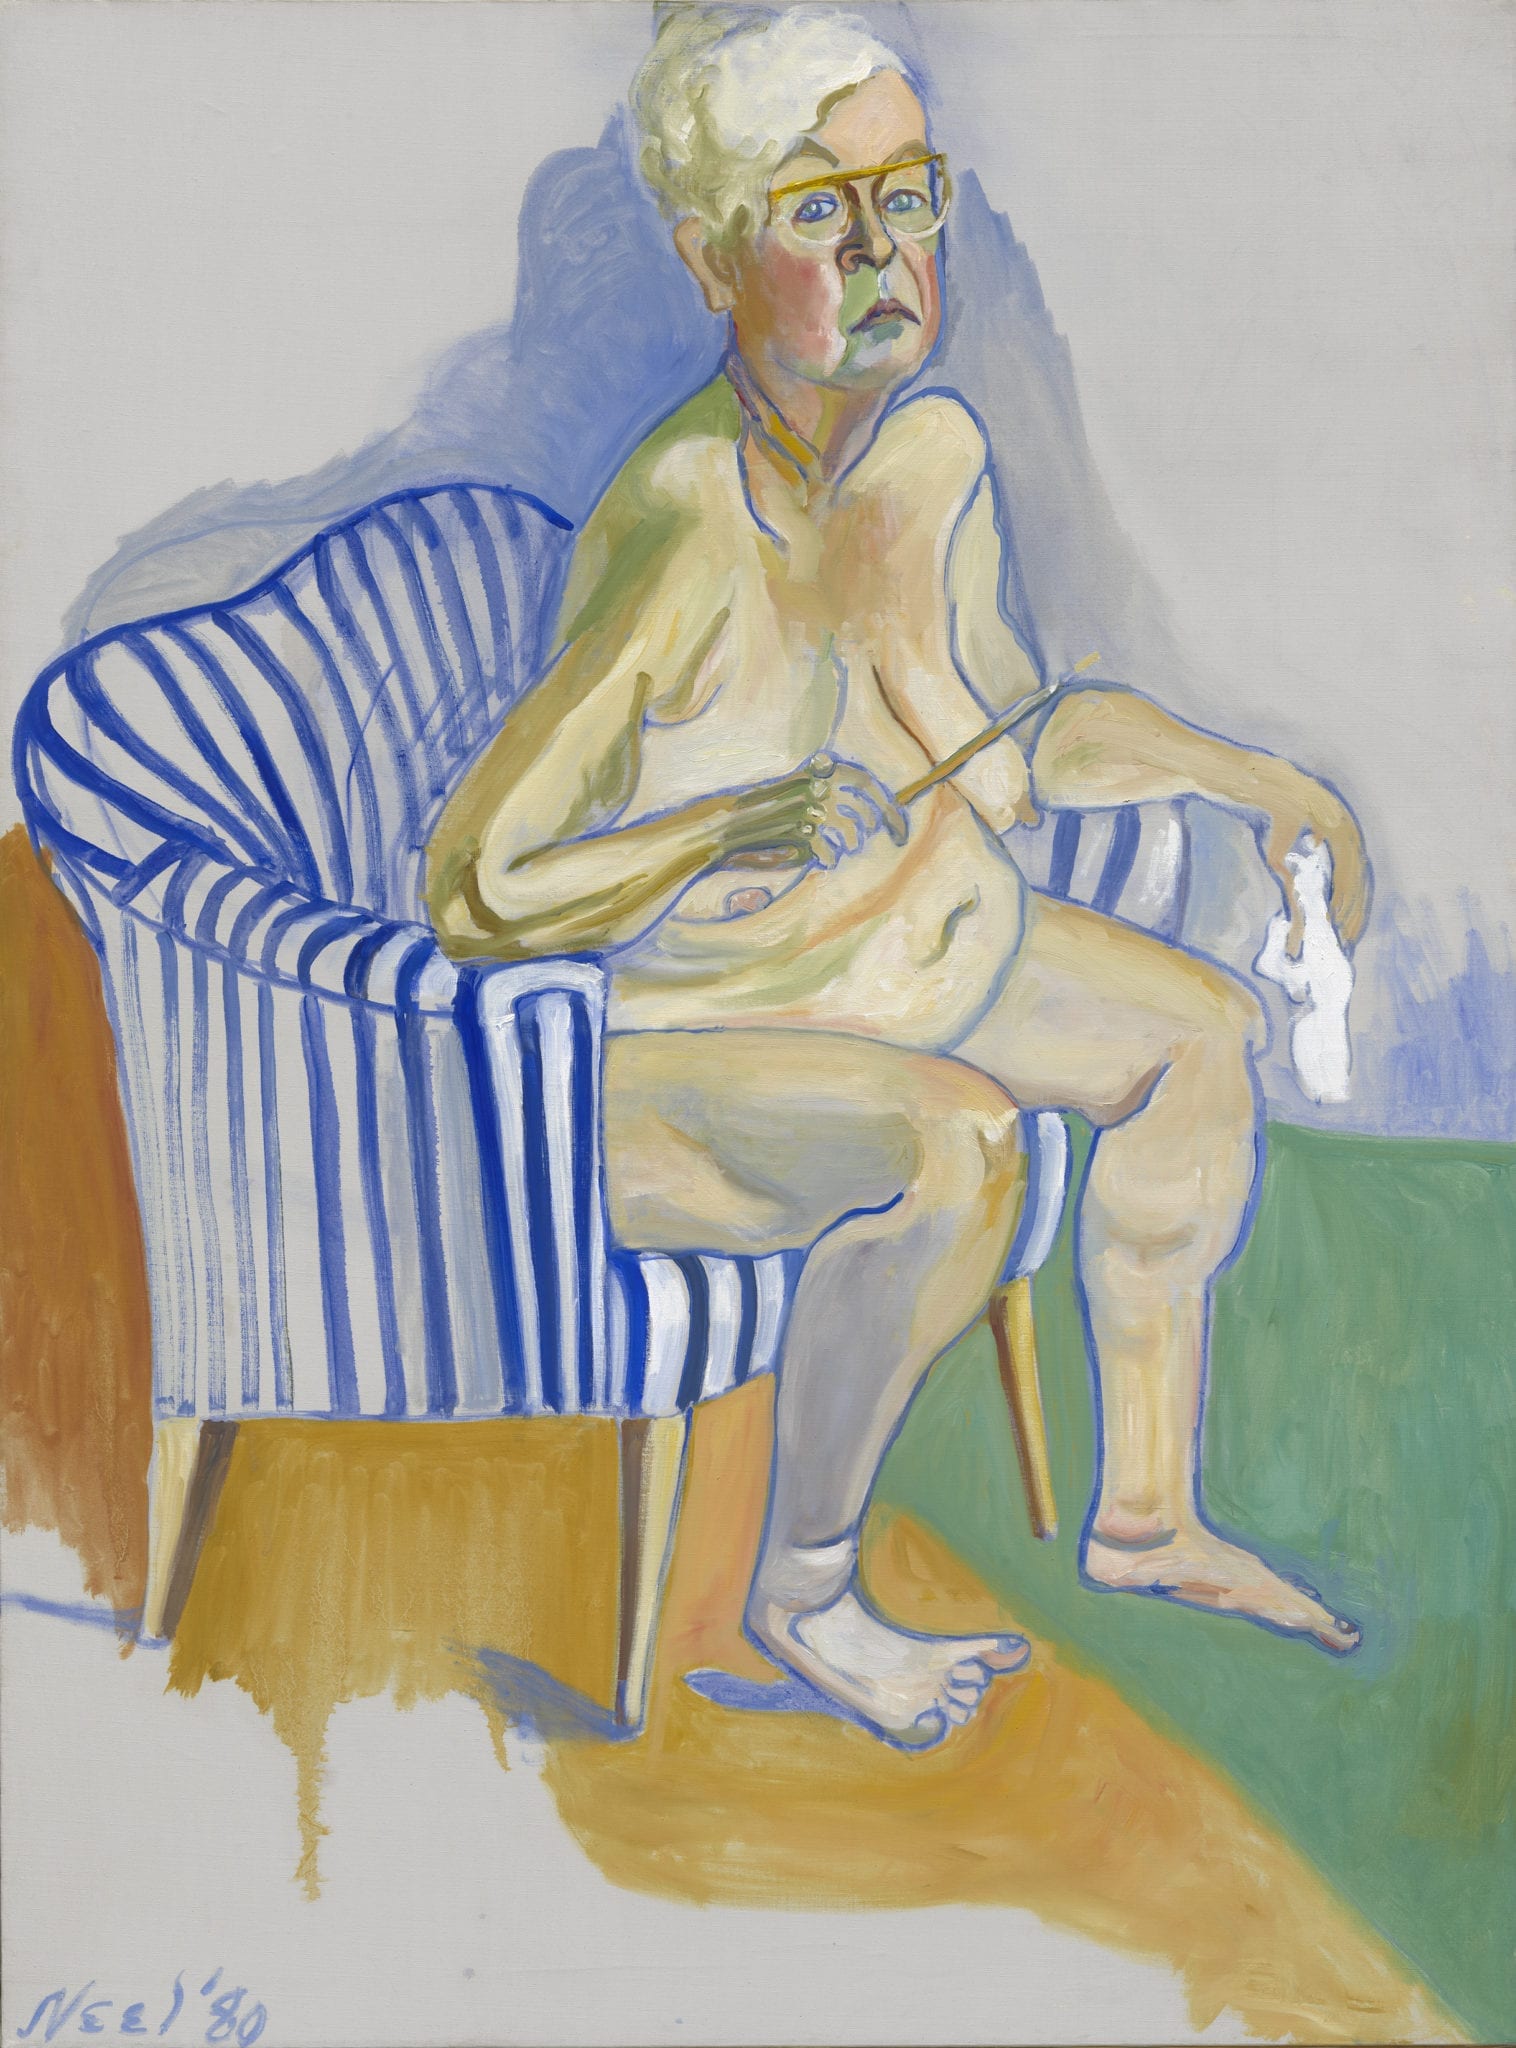 Alice Neel's self portrait, used to teach guided looking